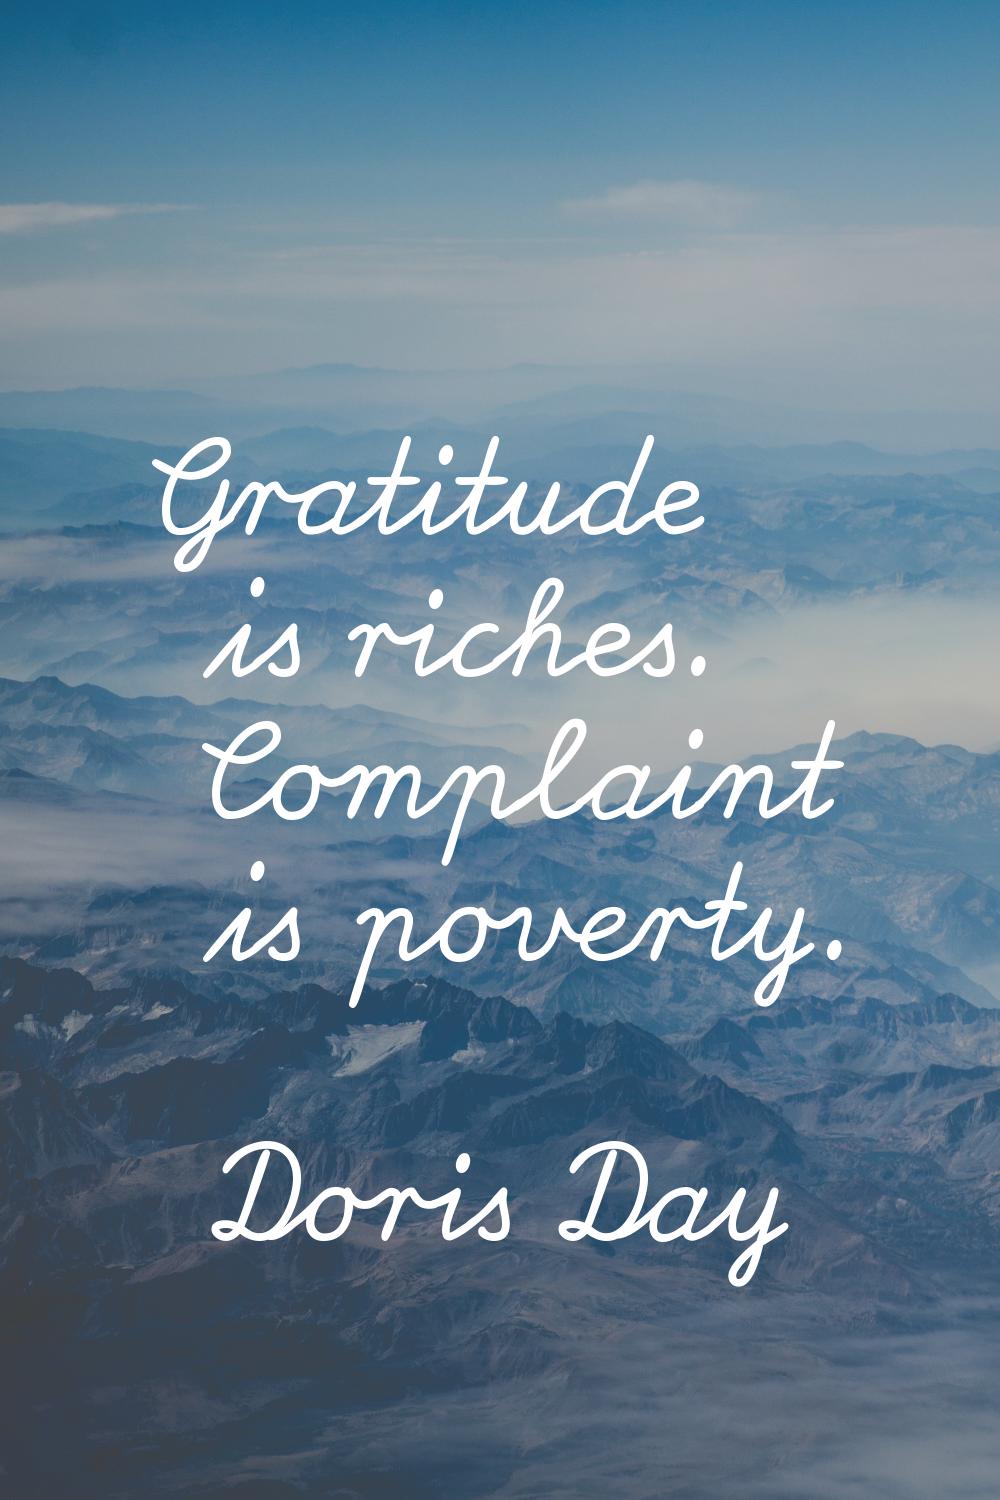 Gratitude is riches. Complaint is poverty.